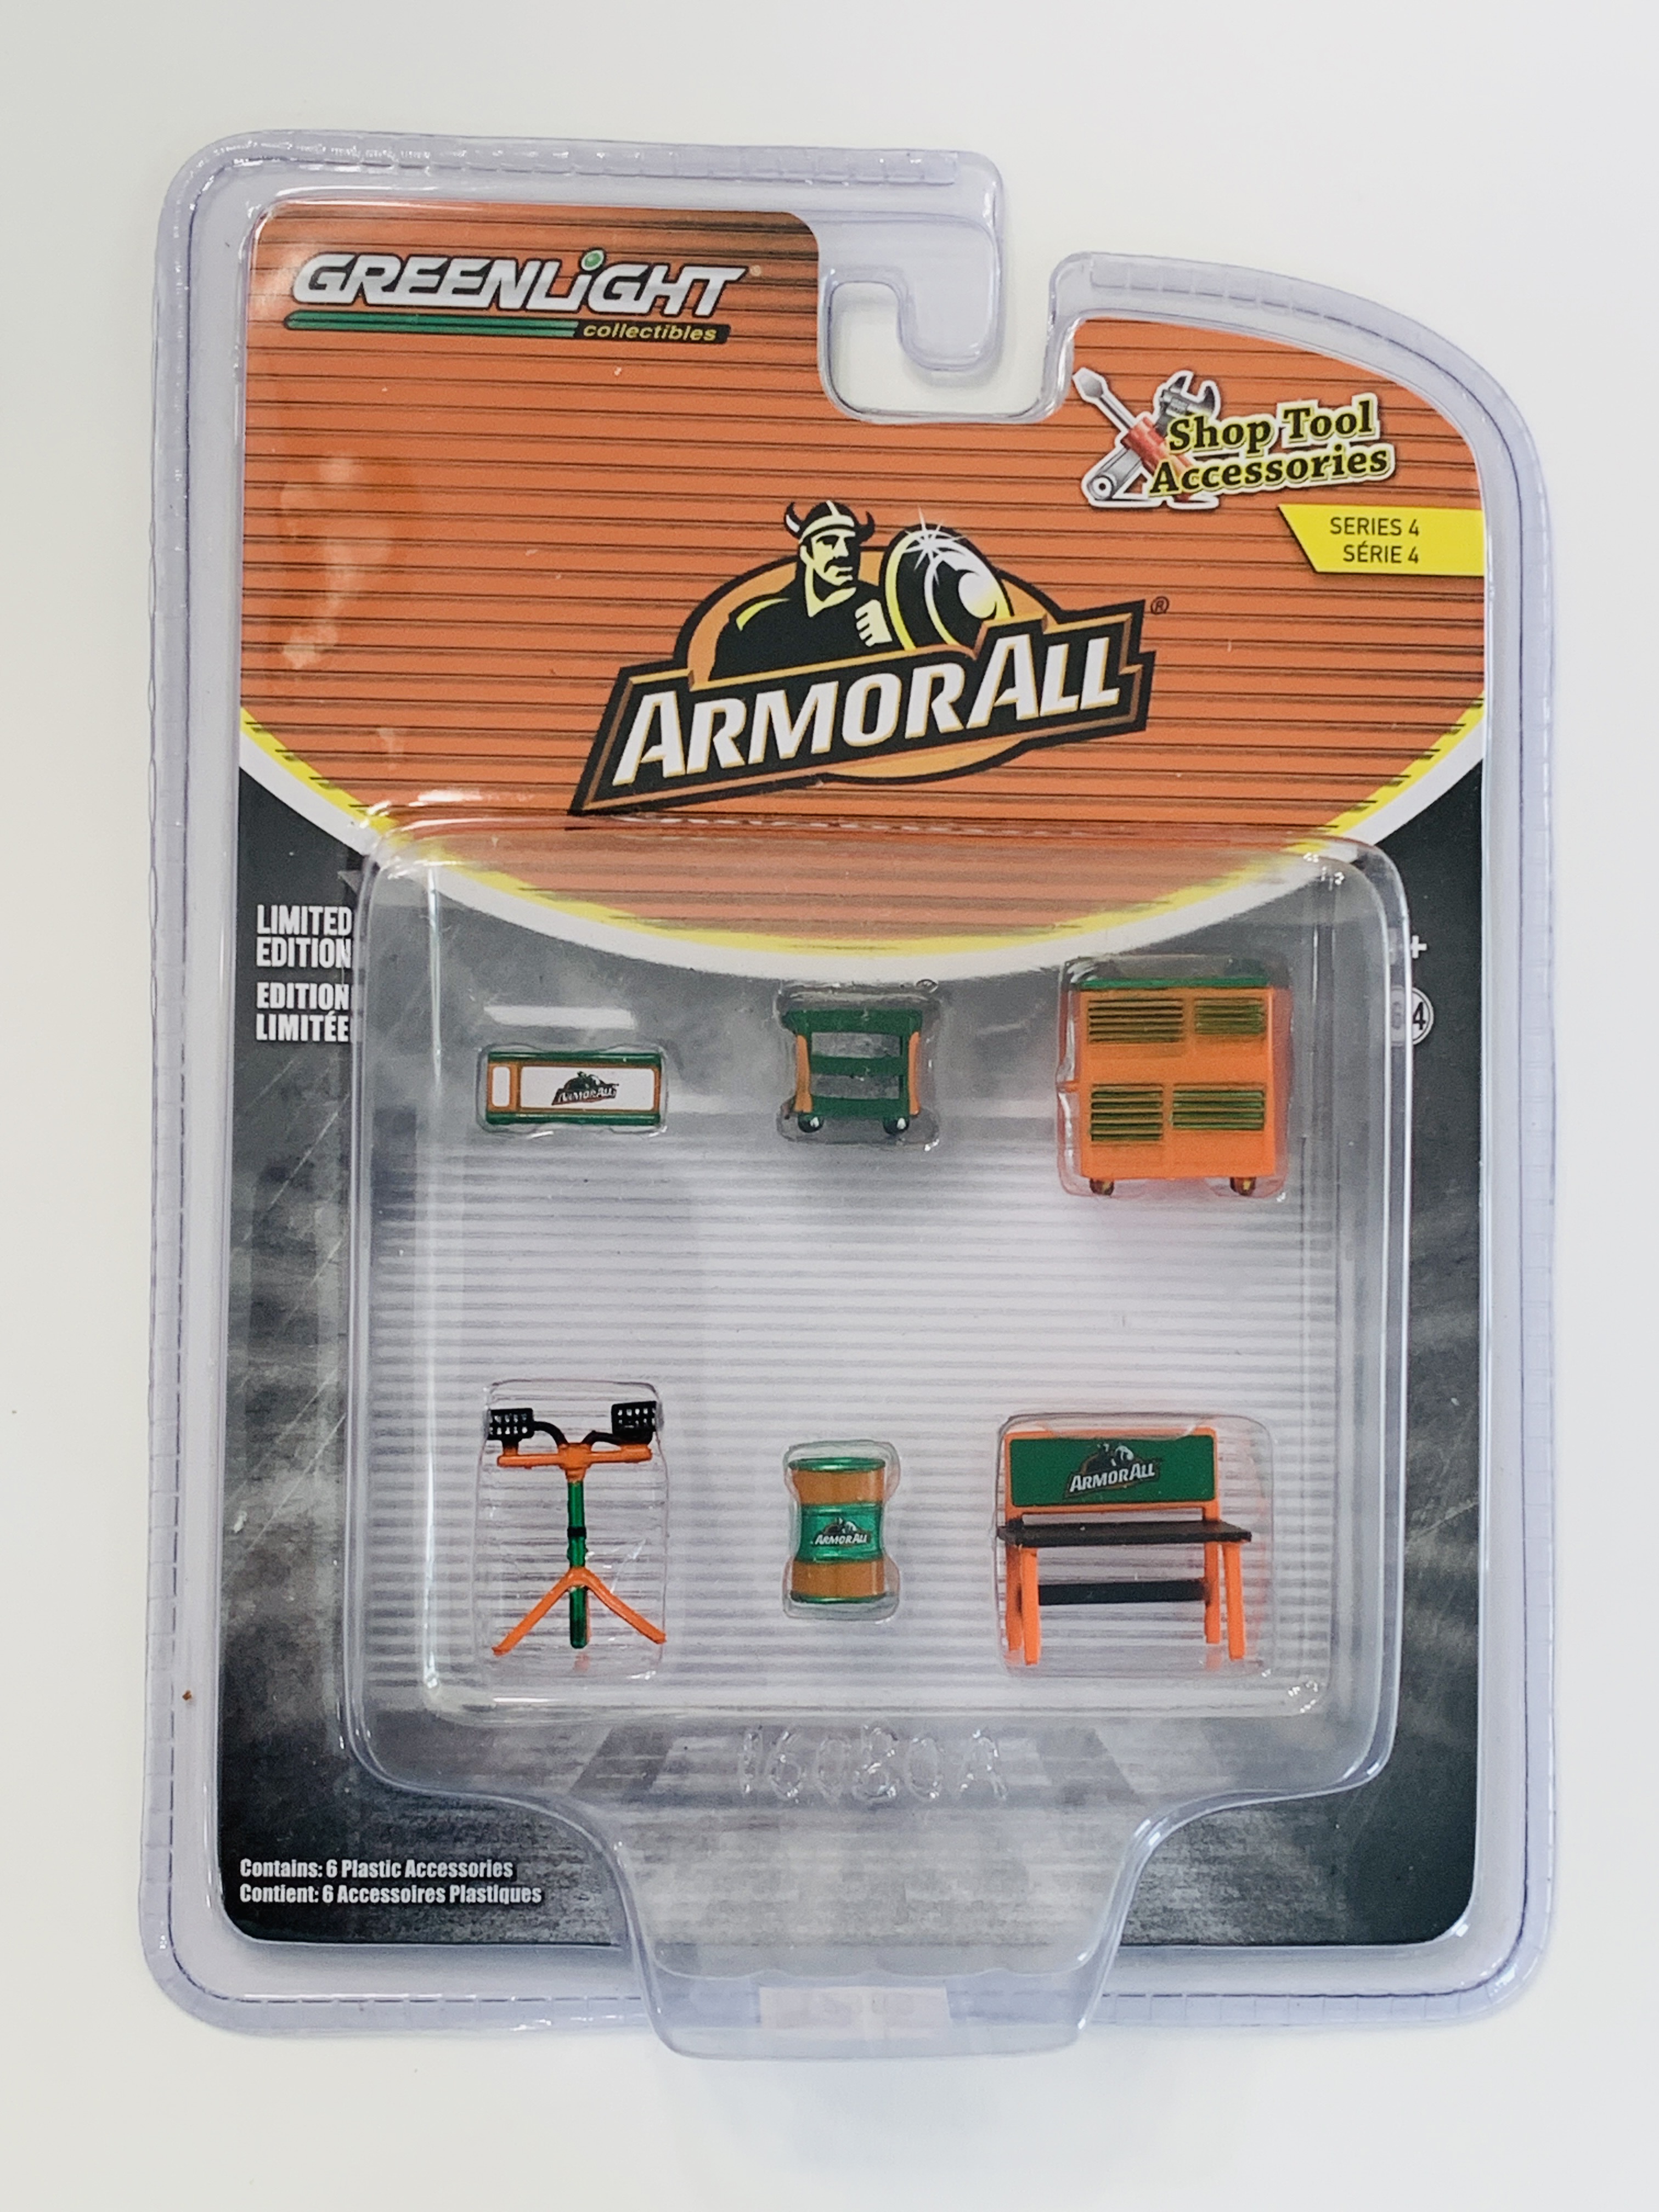 Greenlight Armor All Shop Tool Accessories Series 4